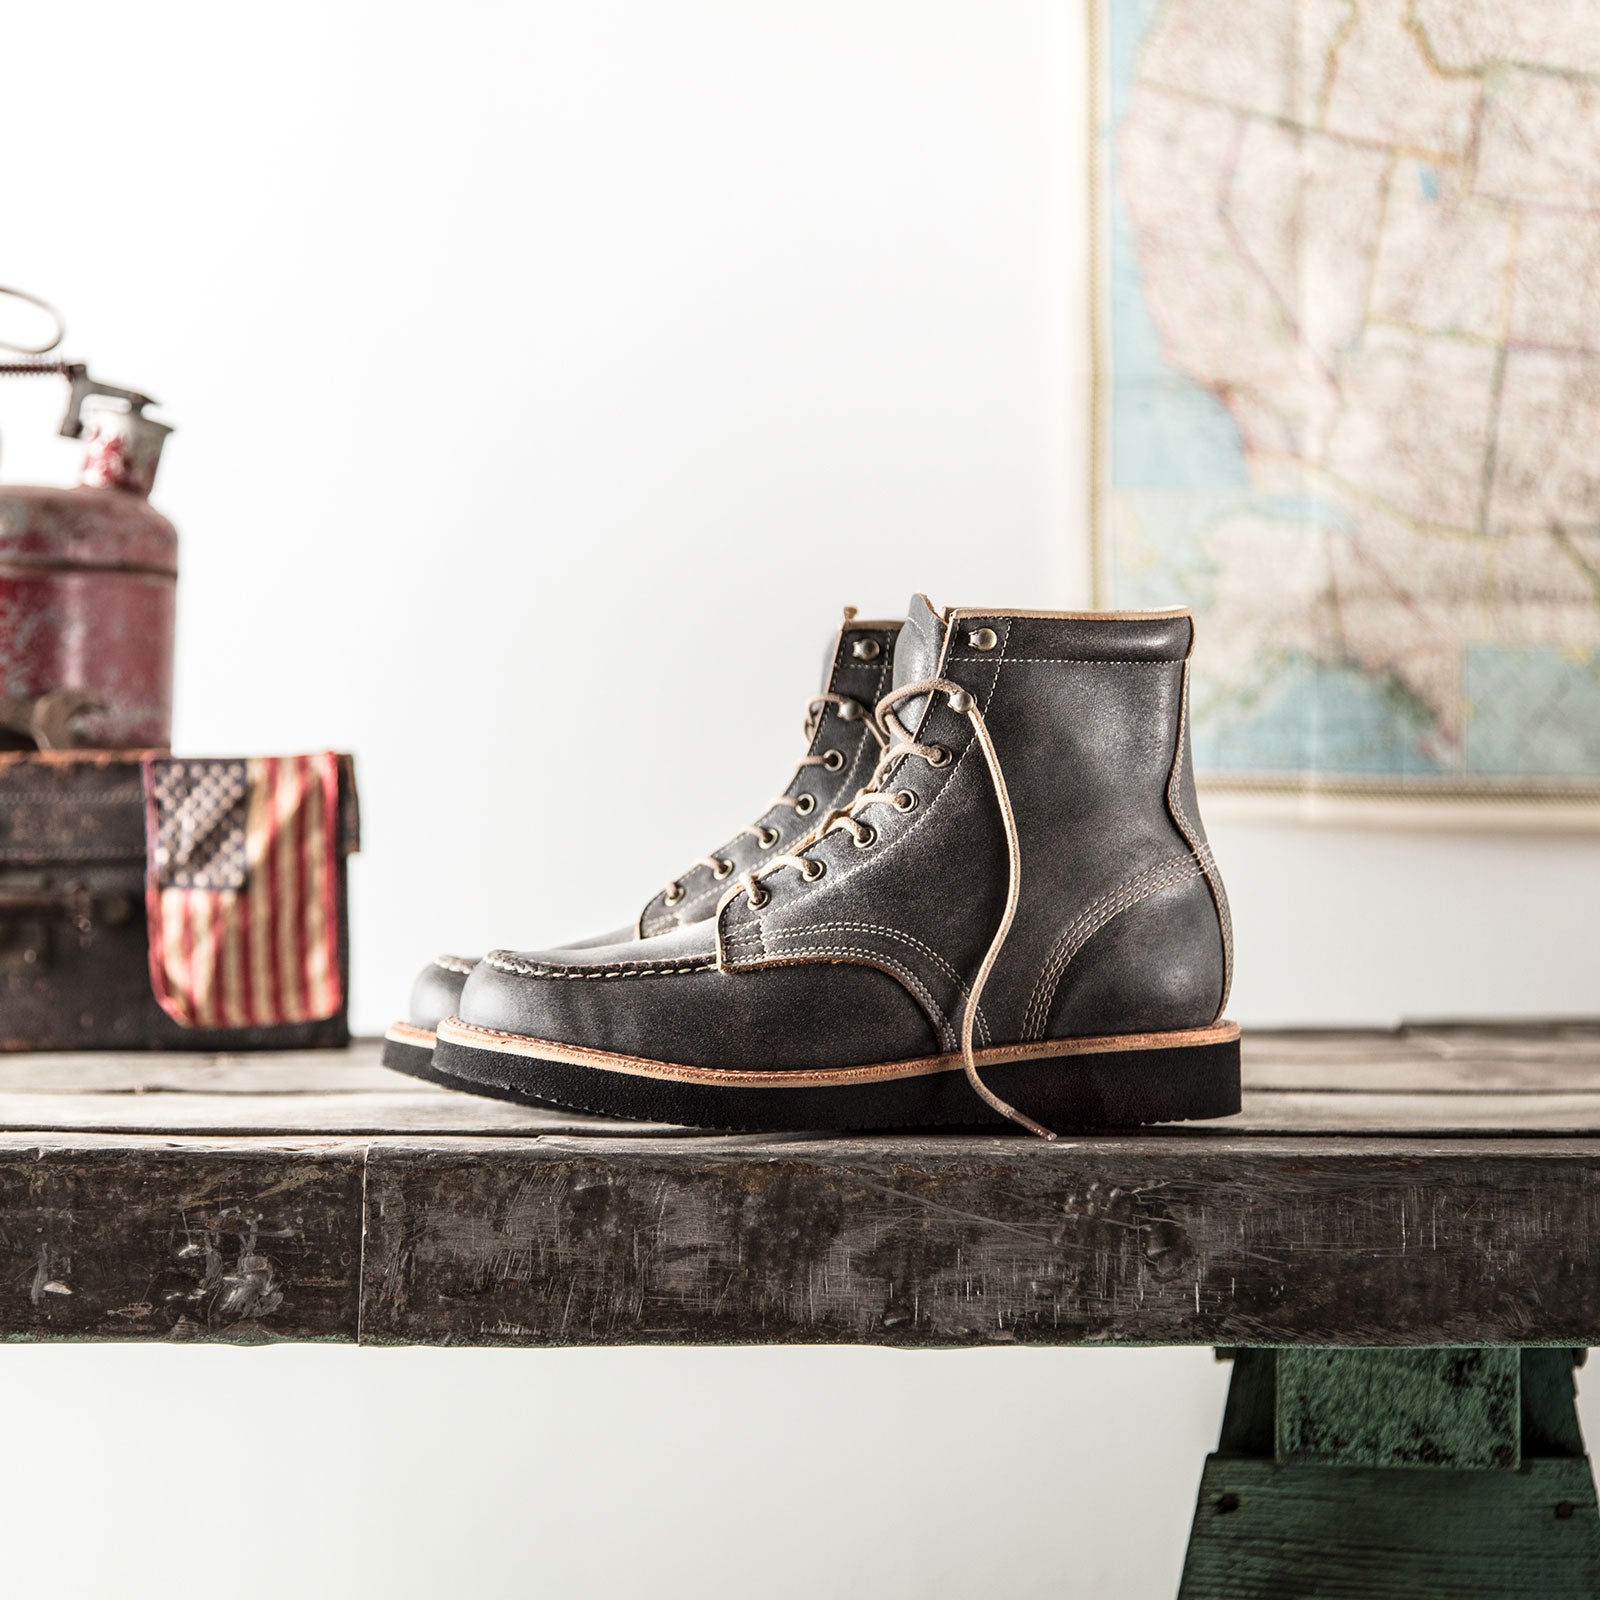 Roestig Symptomen kroeg Timberland Makes Our New Favorite Everyday Boot